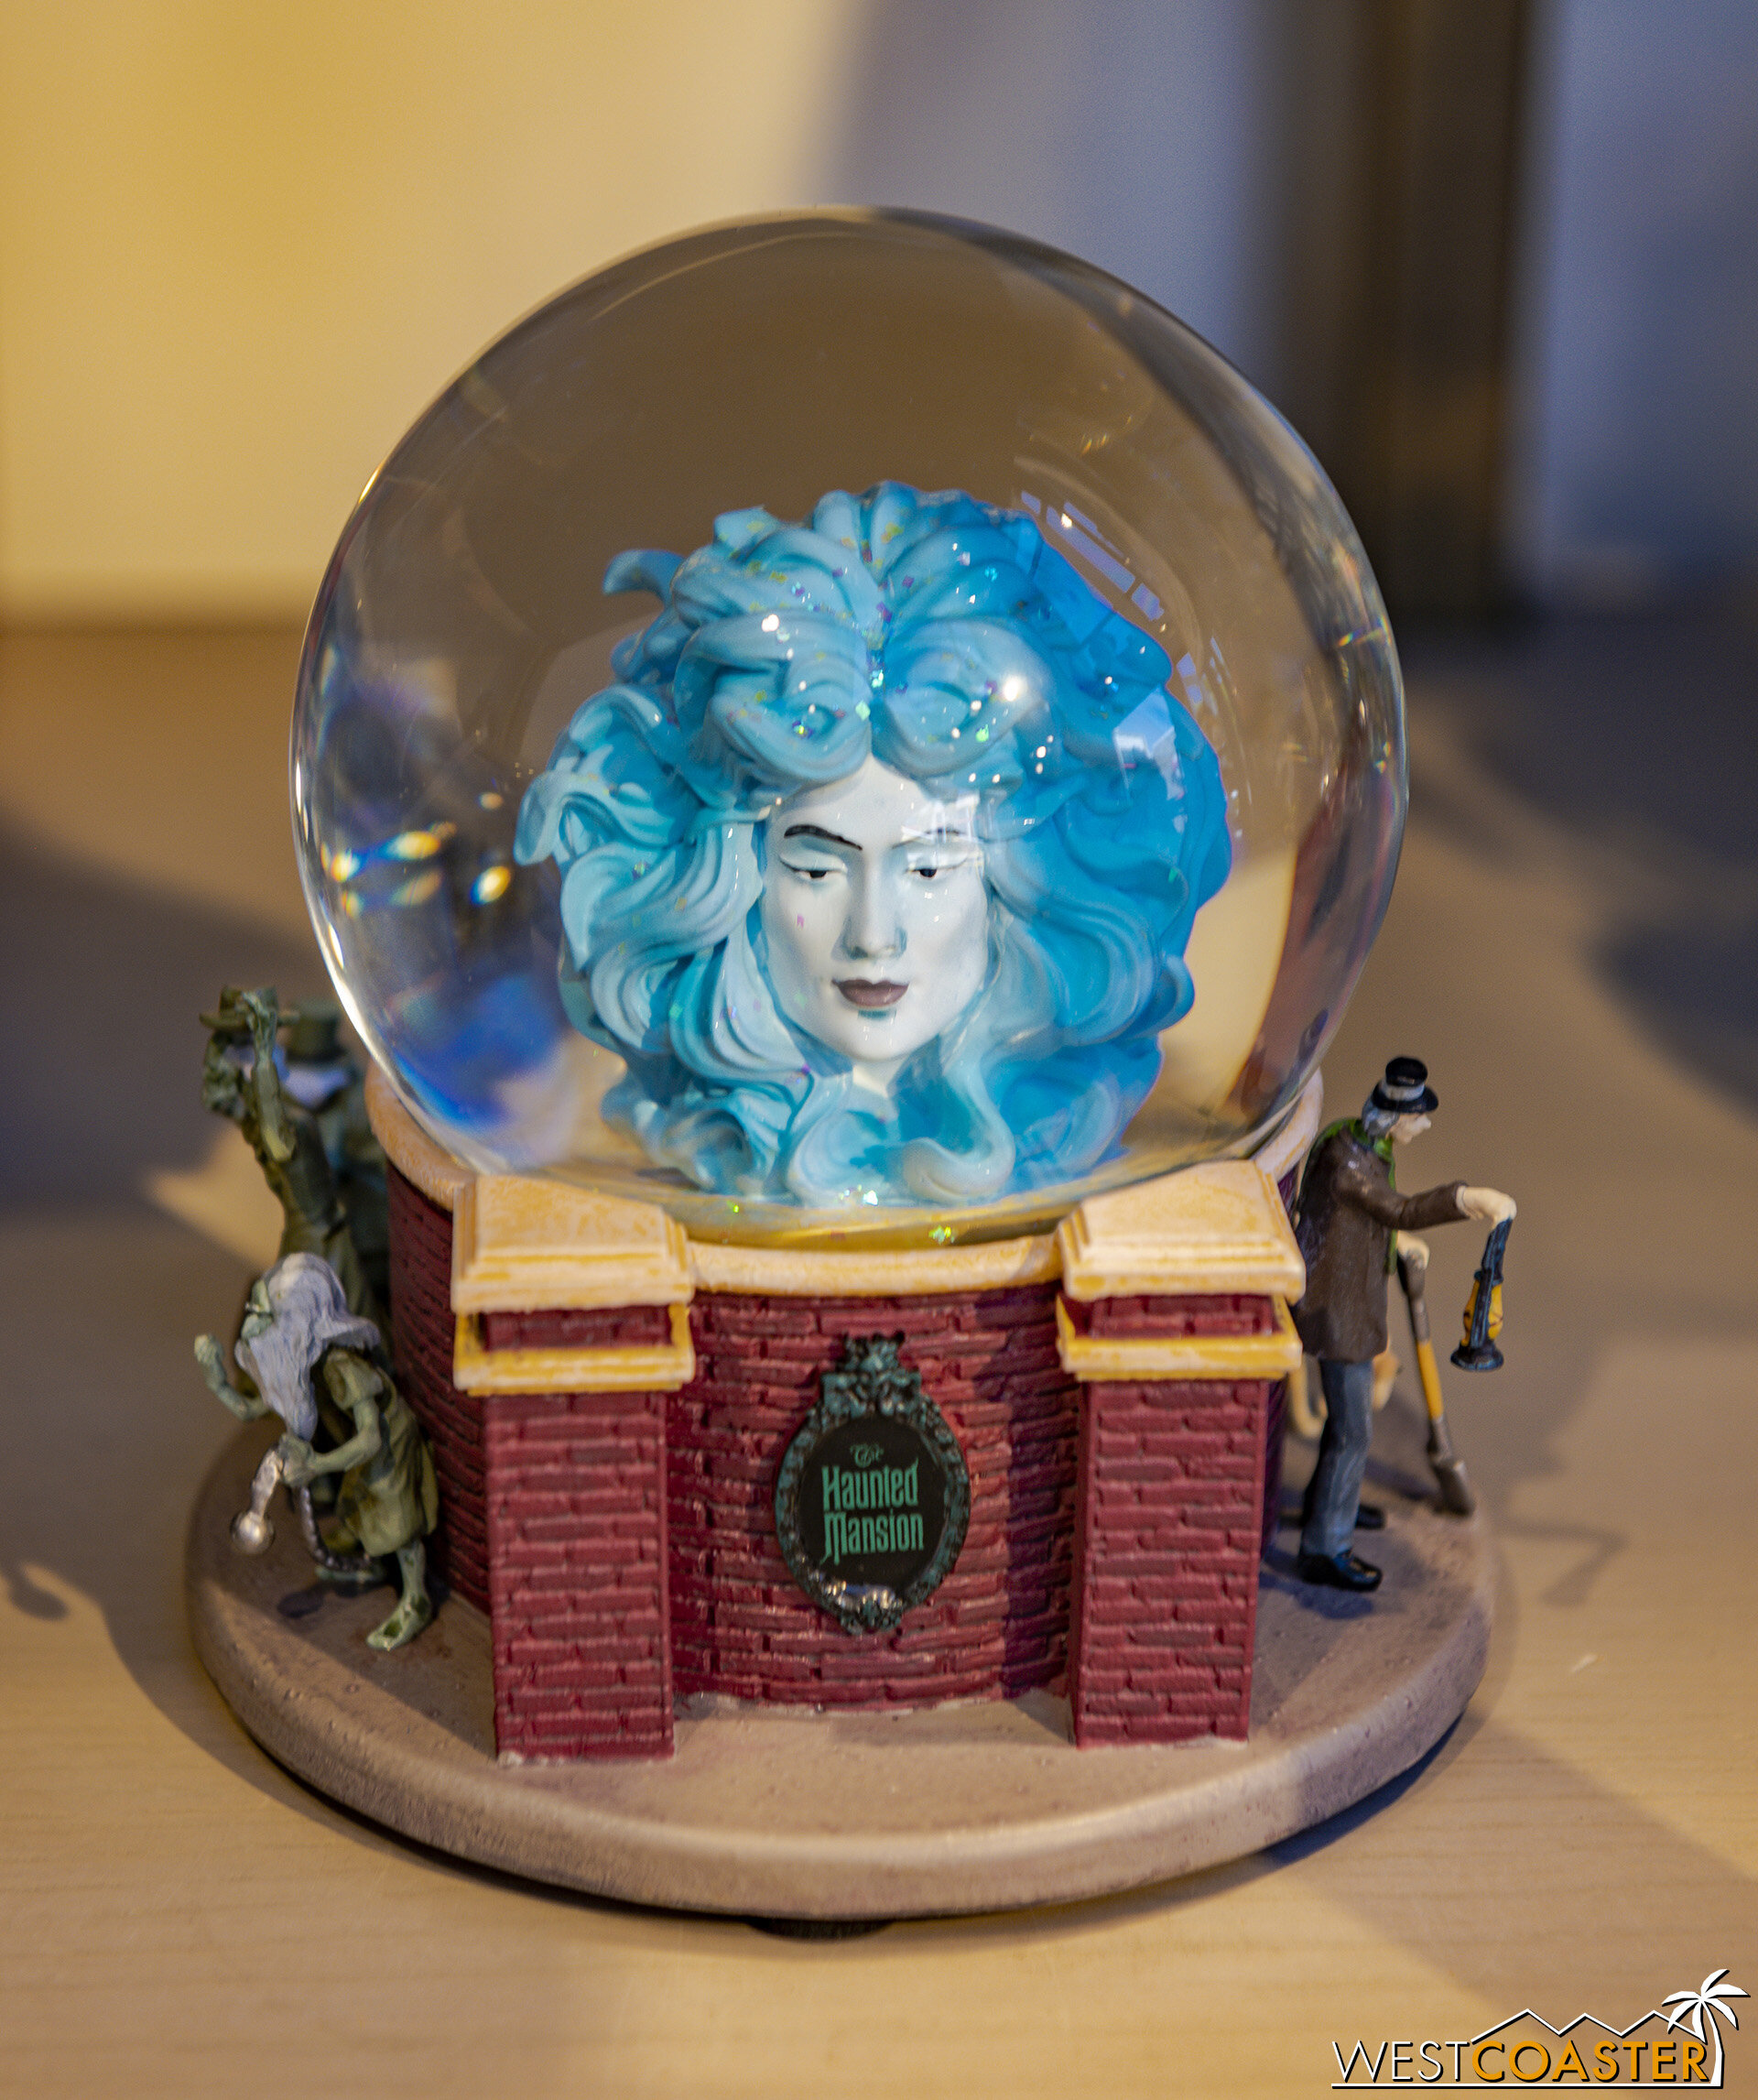  They had two Madame Leota souvenirs.  This one was more elaborate snowglobe. 